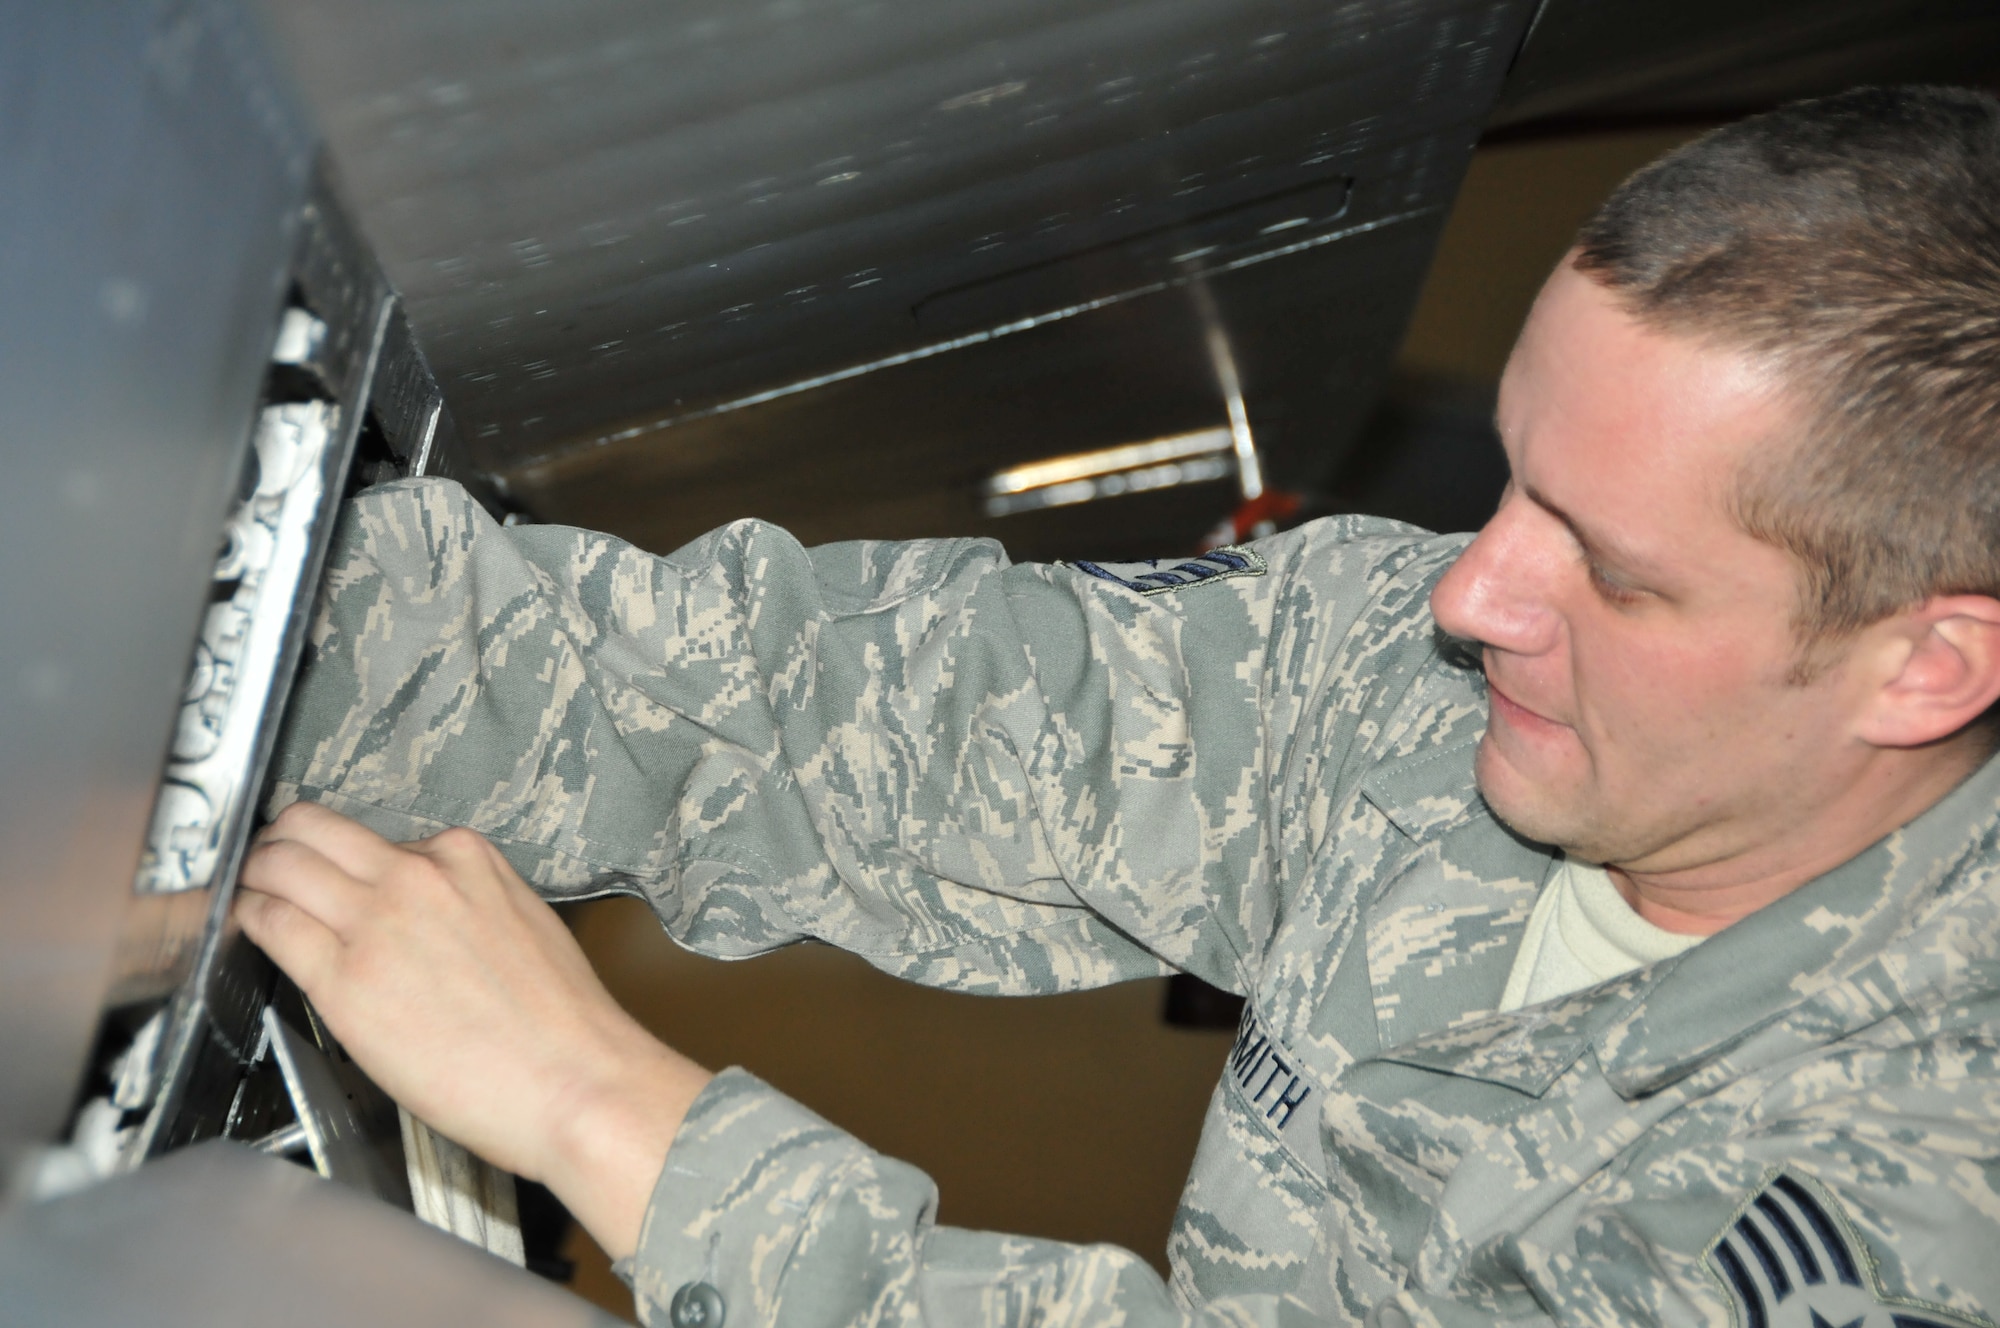 Staff Sgt. Stephen Smith performs maintenance radar
upgrades on a F-16 Fighting Falcon.